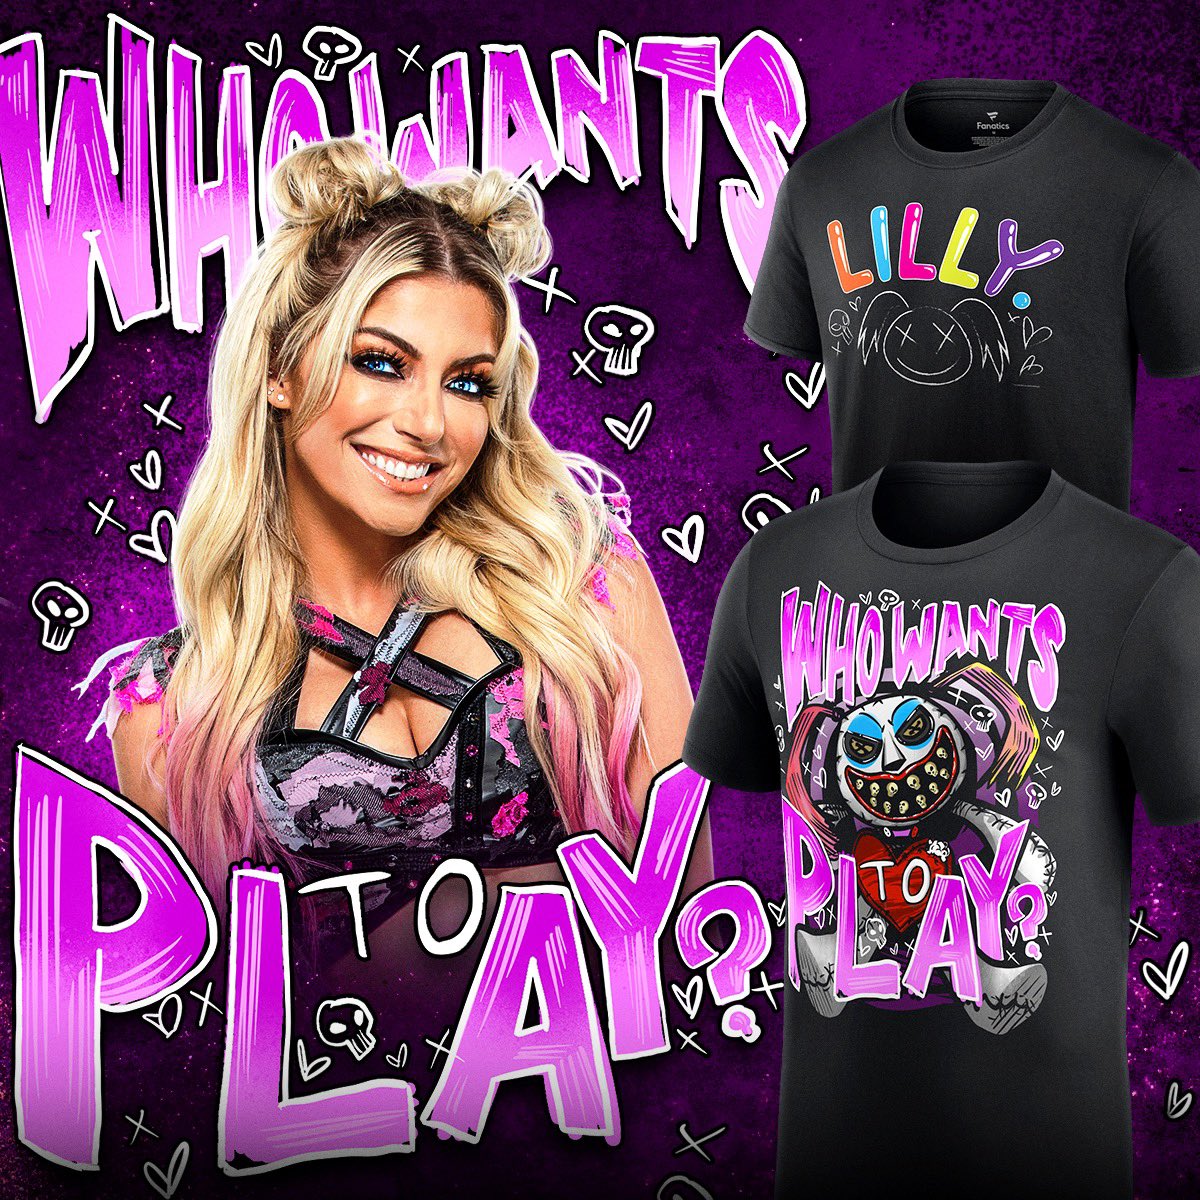 Sprede klassisk oase WWEShop.com on Twitter: "Who wants to play? Check out these NEW Alexa Bliss  T-Shirts today! Available now at #WWEShop #WWE 🛒: https://t.co/JhumdGfkTv  https://t.co/HTbuIeo0oj" / X